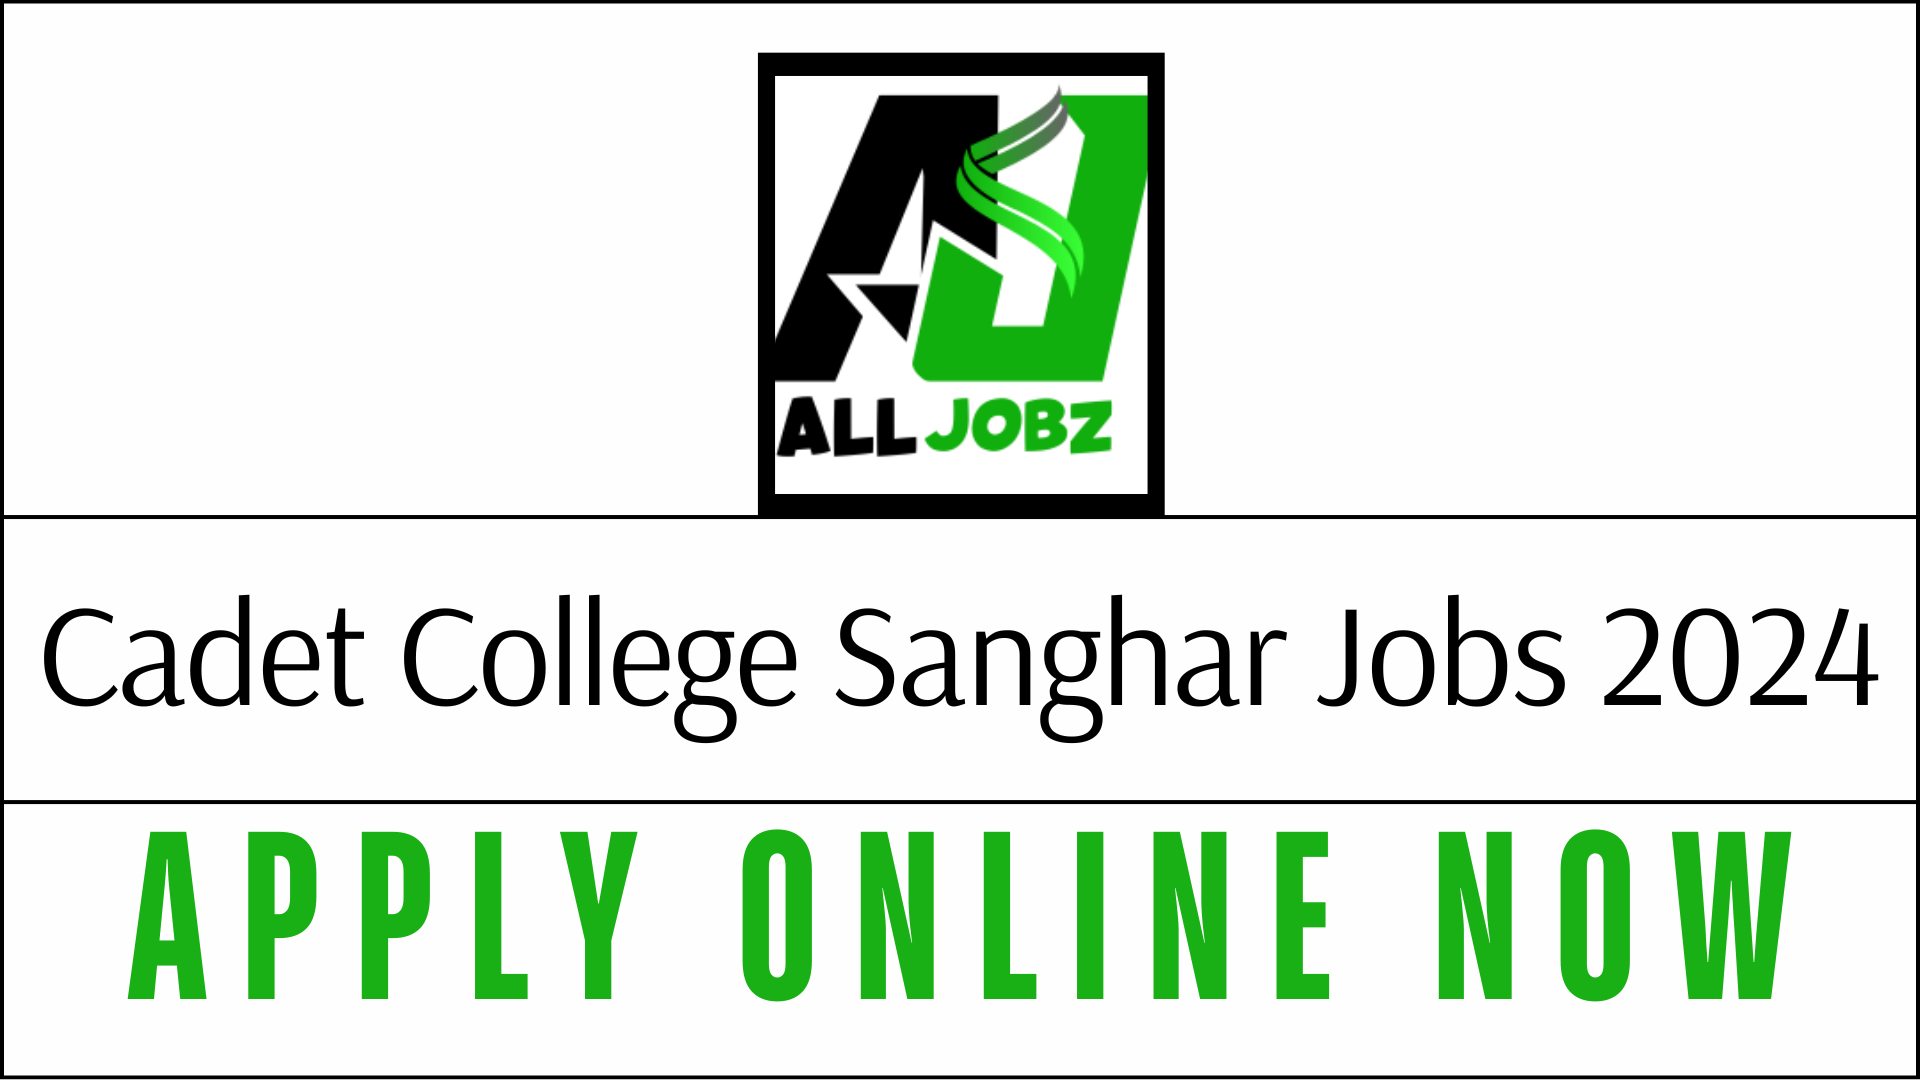 Are You An Aspiring Educator Looking For A Prestigious Position In A Reputable Institution? Situation Vacant At Cadet College Sanghar 2024 Has Announced Vacancies For Various Lecturer Positions, Inviting Applications From Eligible Male And Female Candidates Across Pakistan. Cadet College Sanghar Jobs Apply Online, Cadet College Sanghar Jobs 2024, Situation Vacant At Cadet College Sanghar 2024 Pdf. This Recruitment Drive Is A Golden Opportunity For Those Passionate About Teaching And Contributing To The Academic Excellence Of Future Leaders. Situation Vacant At Cadet College Sanghar 2024, Cadet College Sanghar Jobs Apply Online, Cadet College Sanghar Jobs 2024, Situation Vacant At Cadet College Sanghar 2024 Pdf, Situation Vacant At Cadet College Sanghar 2024 Merit List, Situation Vacant At Cadet College Sanghar 2024 Last Date, Situation Vacant At Cadet College Sanghar 2024 Apply.